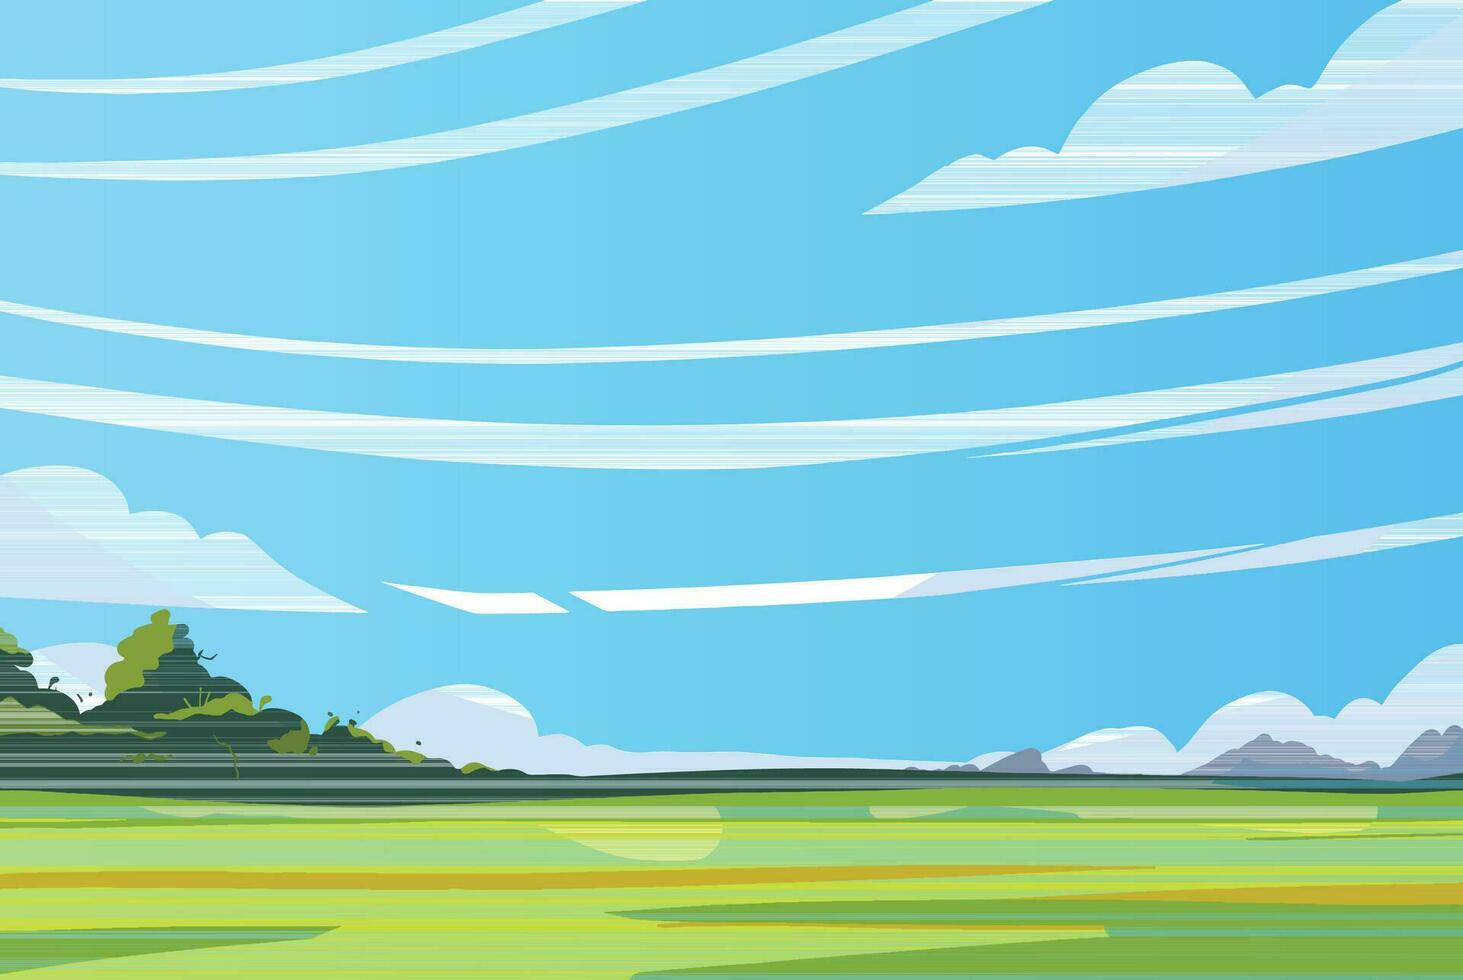 Landscape Background vector illustration with Open sky and field